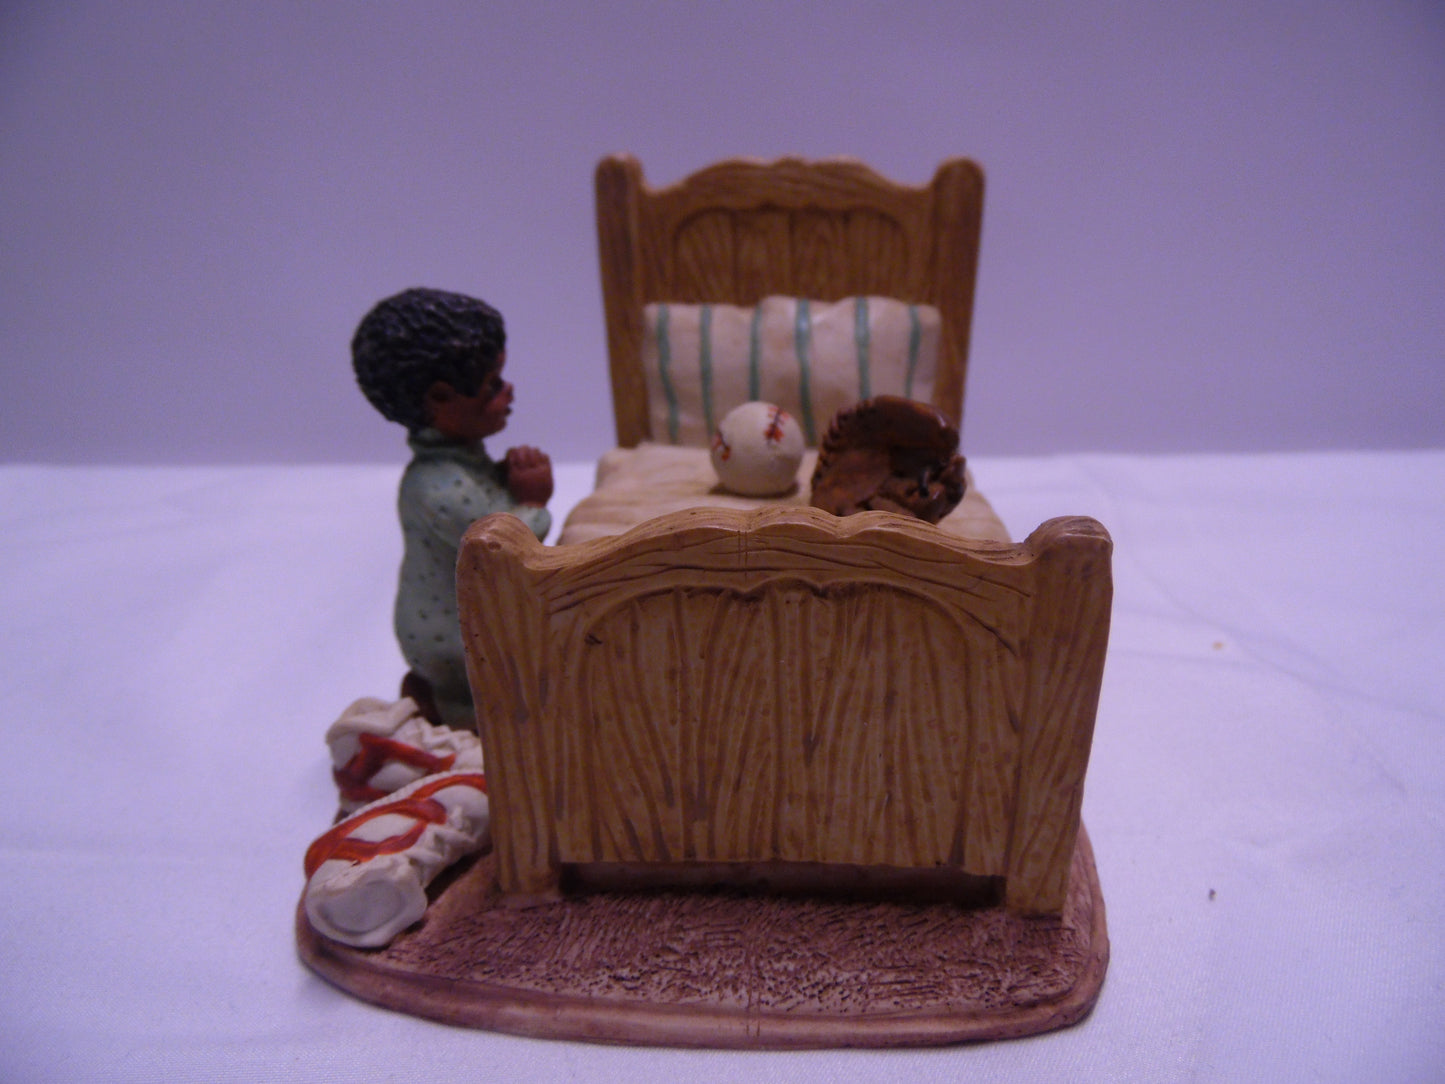 Vintage 1990's Black African American Young Boy Praying by Bed Ceramic Figurine